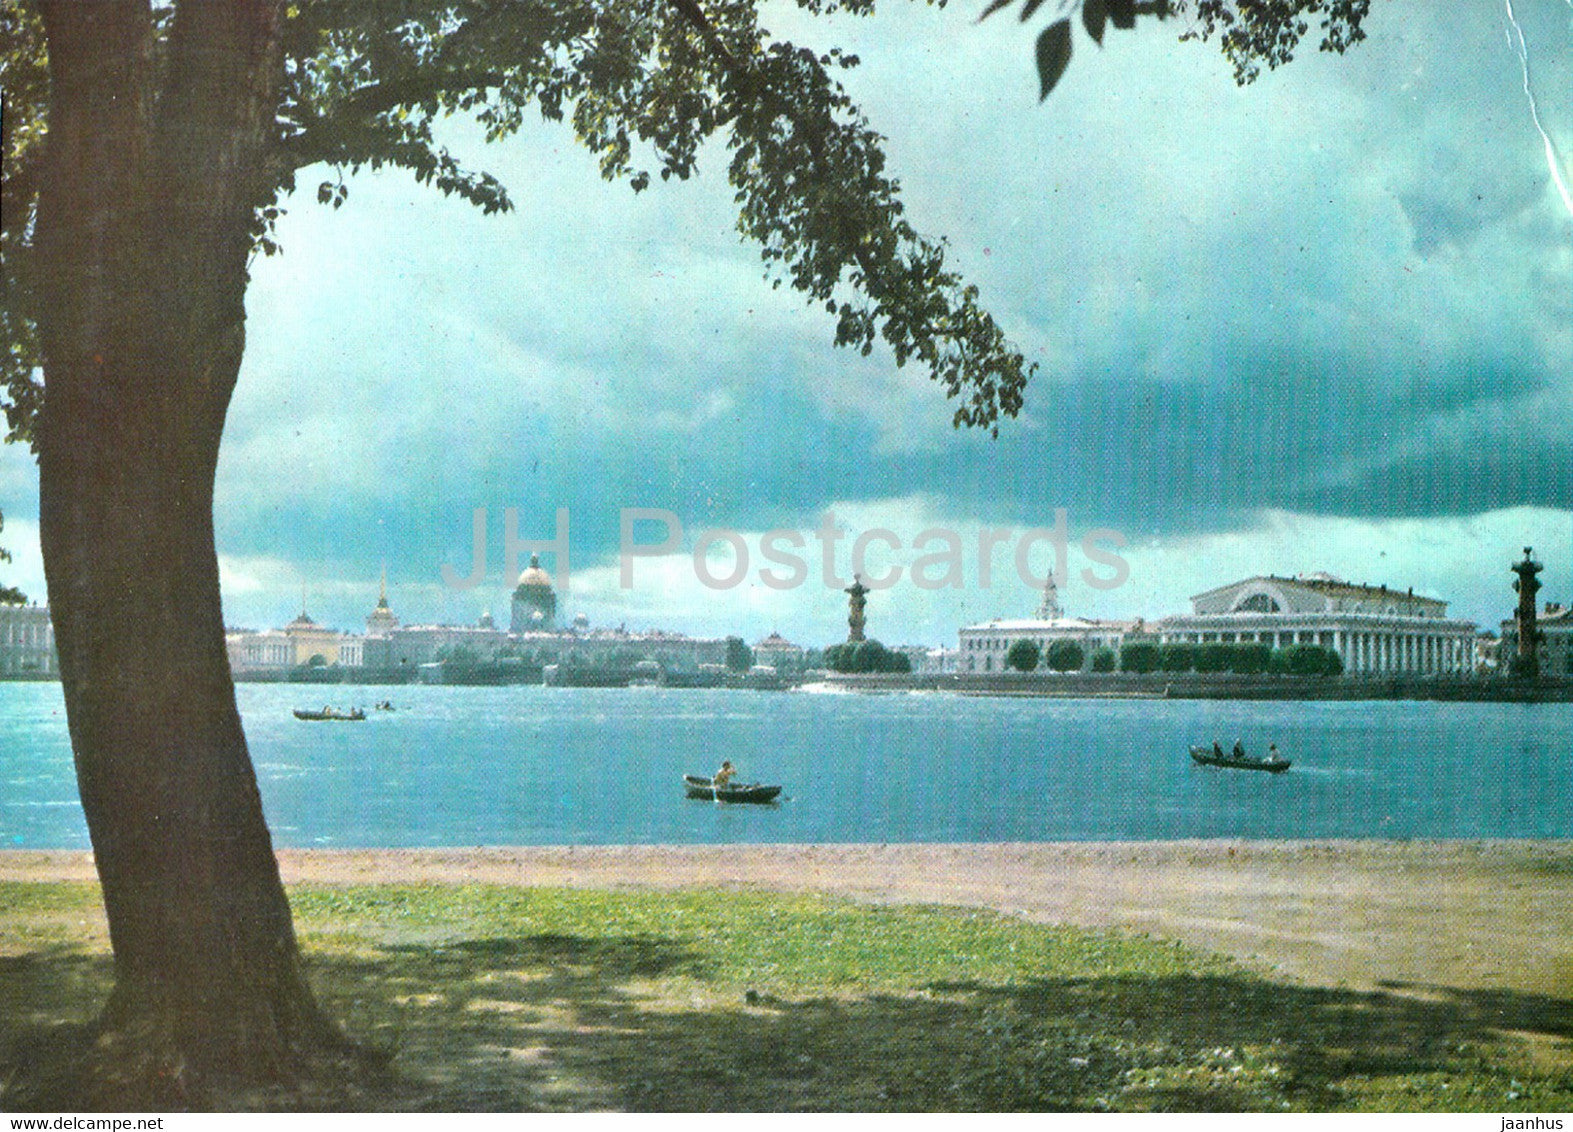 Leningrad - St Petersburg - View of the Spit of Vasilievsky Island - postal stationery - AVIA - Russia USSR - used - JH Postcards